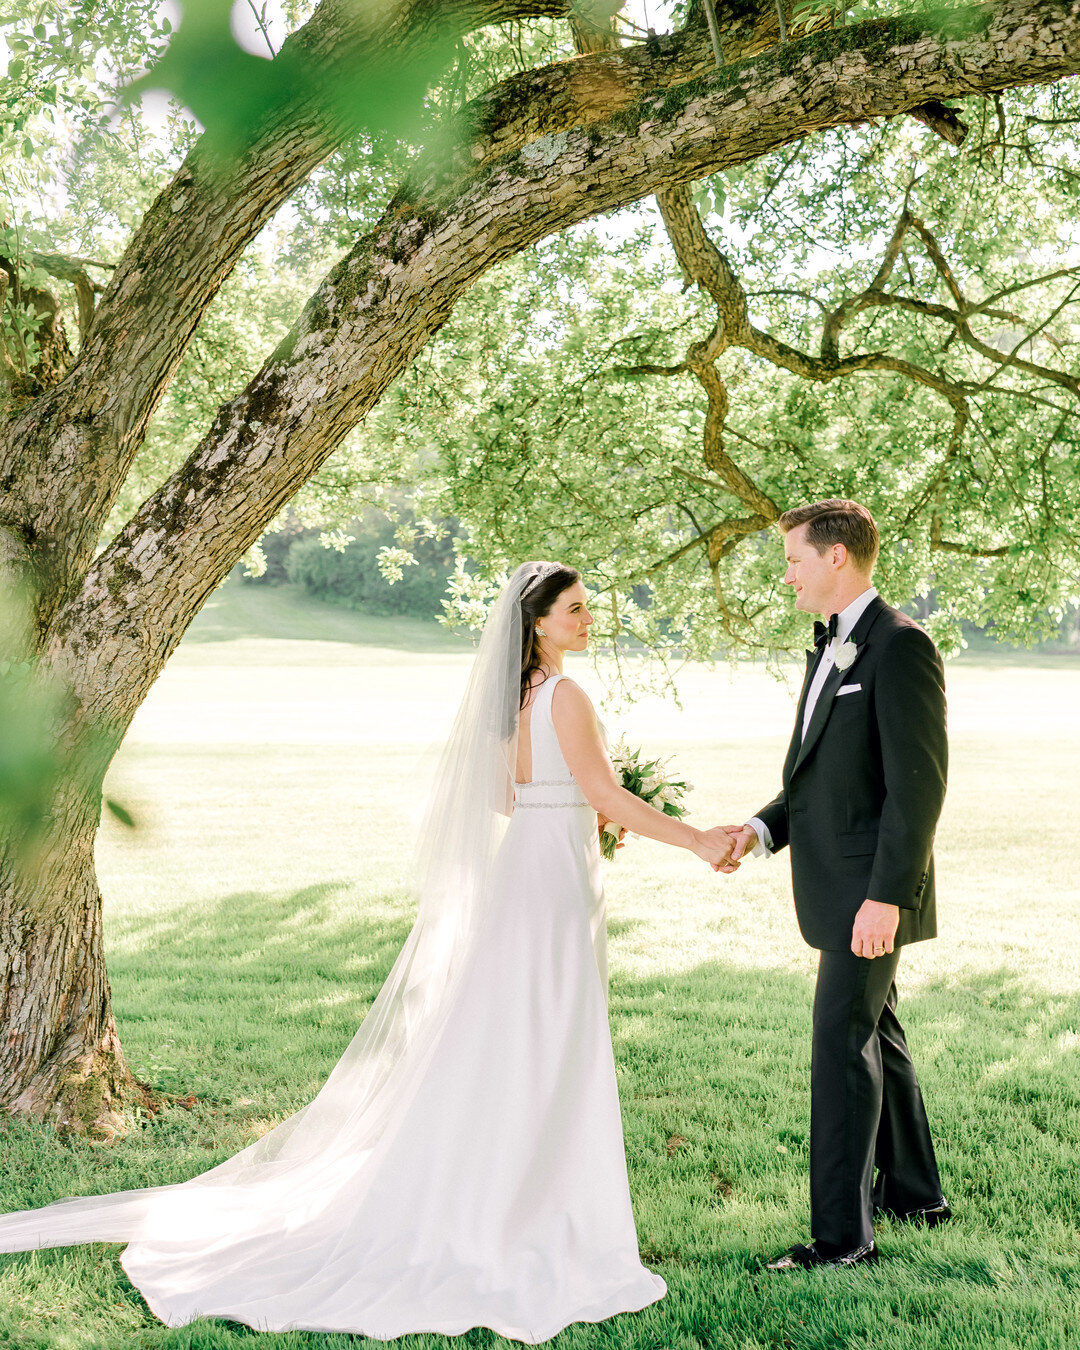 A sleek modern Pittsburgh wedding by Dawn Derbyshire at The Fox Chapel Golf Club, a gorgeous venue which also provides a perfect "getting ready" location. The club also provided the perfect backdrop for Abby's bridal details. The couple's chic visio…